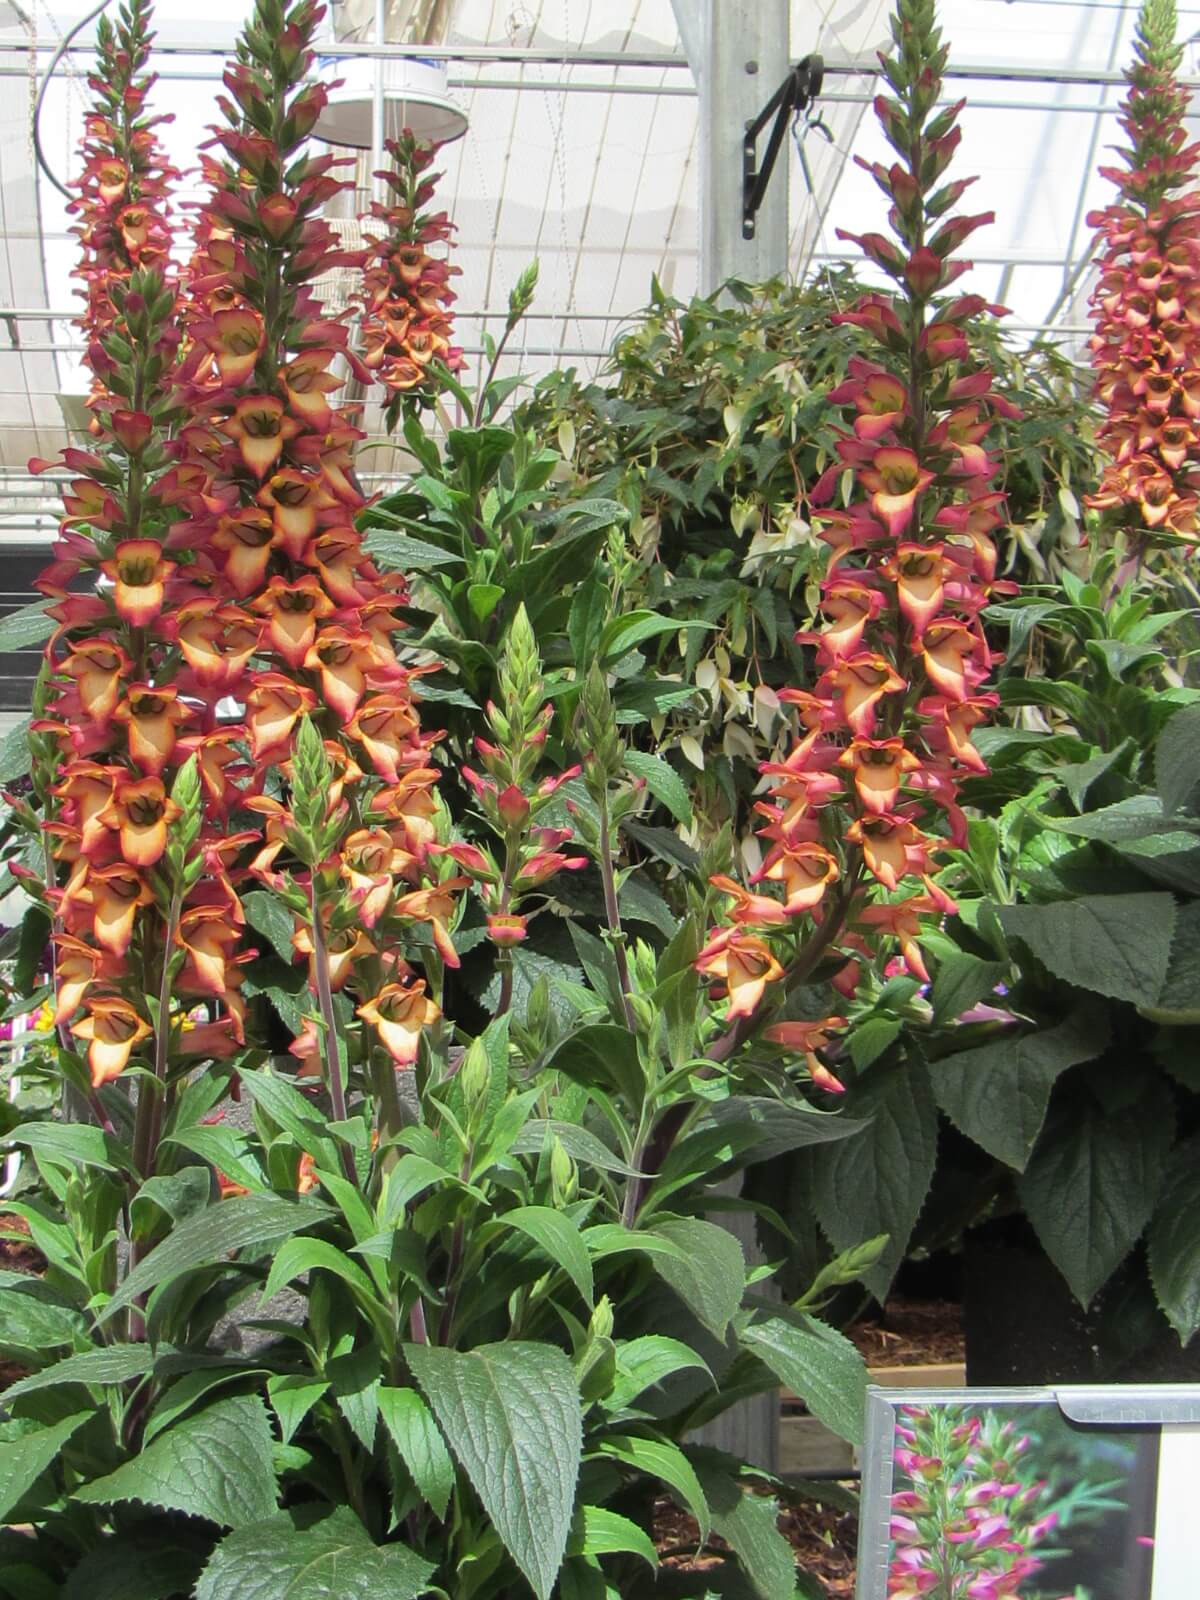 The long-blooming 'Illumination Flame' will light up any late-summer garden.